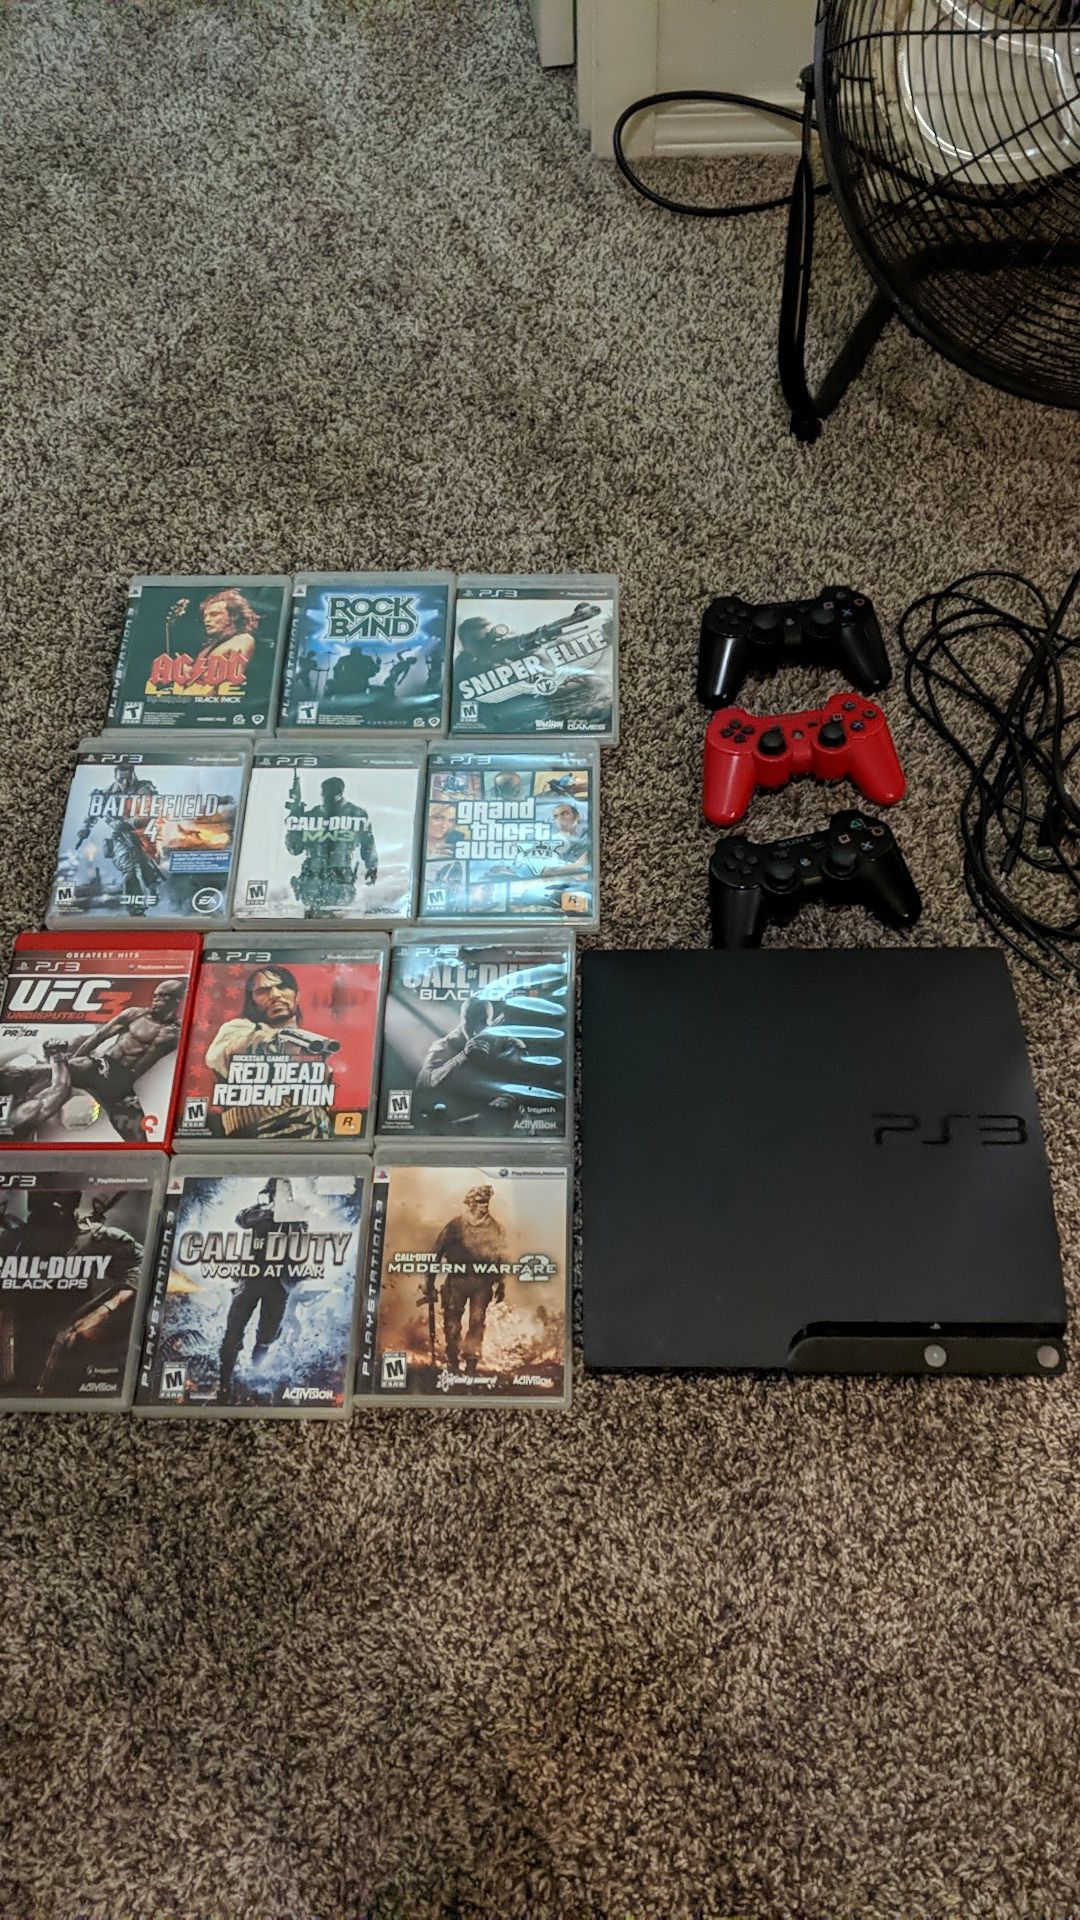 PlayStation 3 with games and controllers